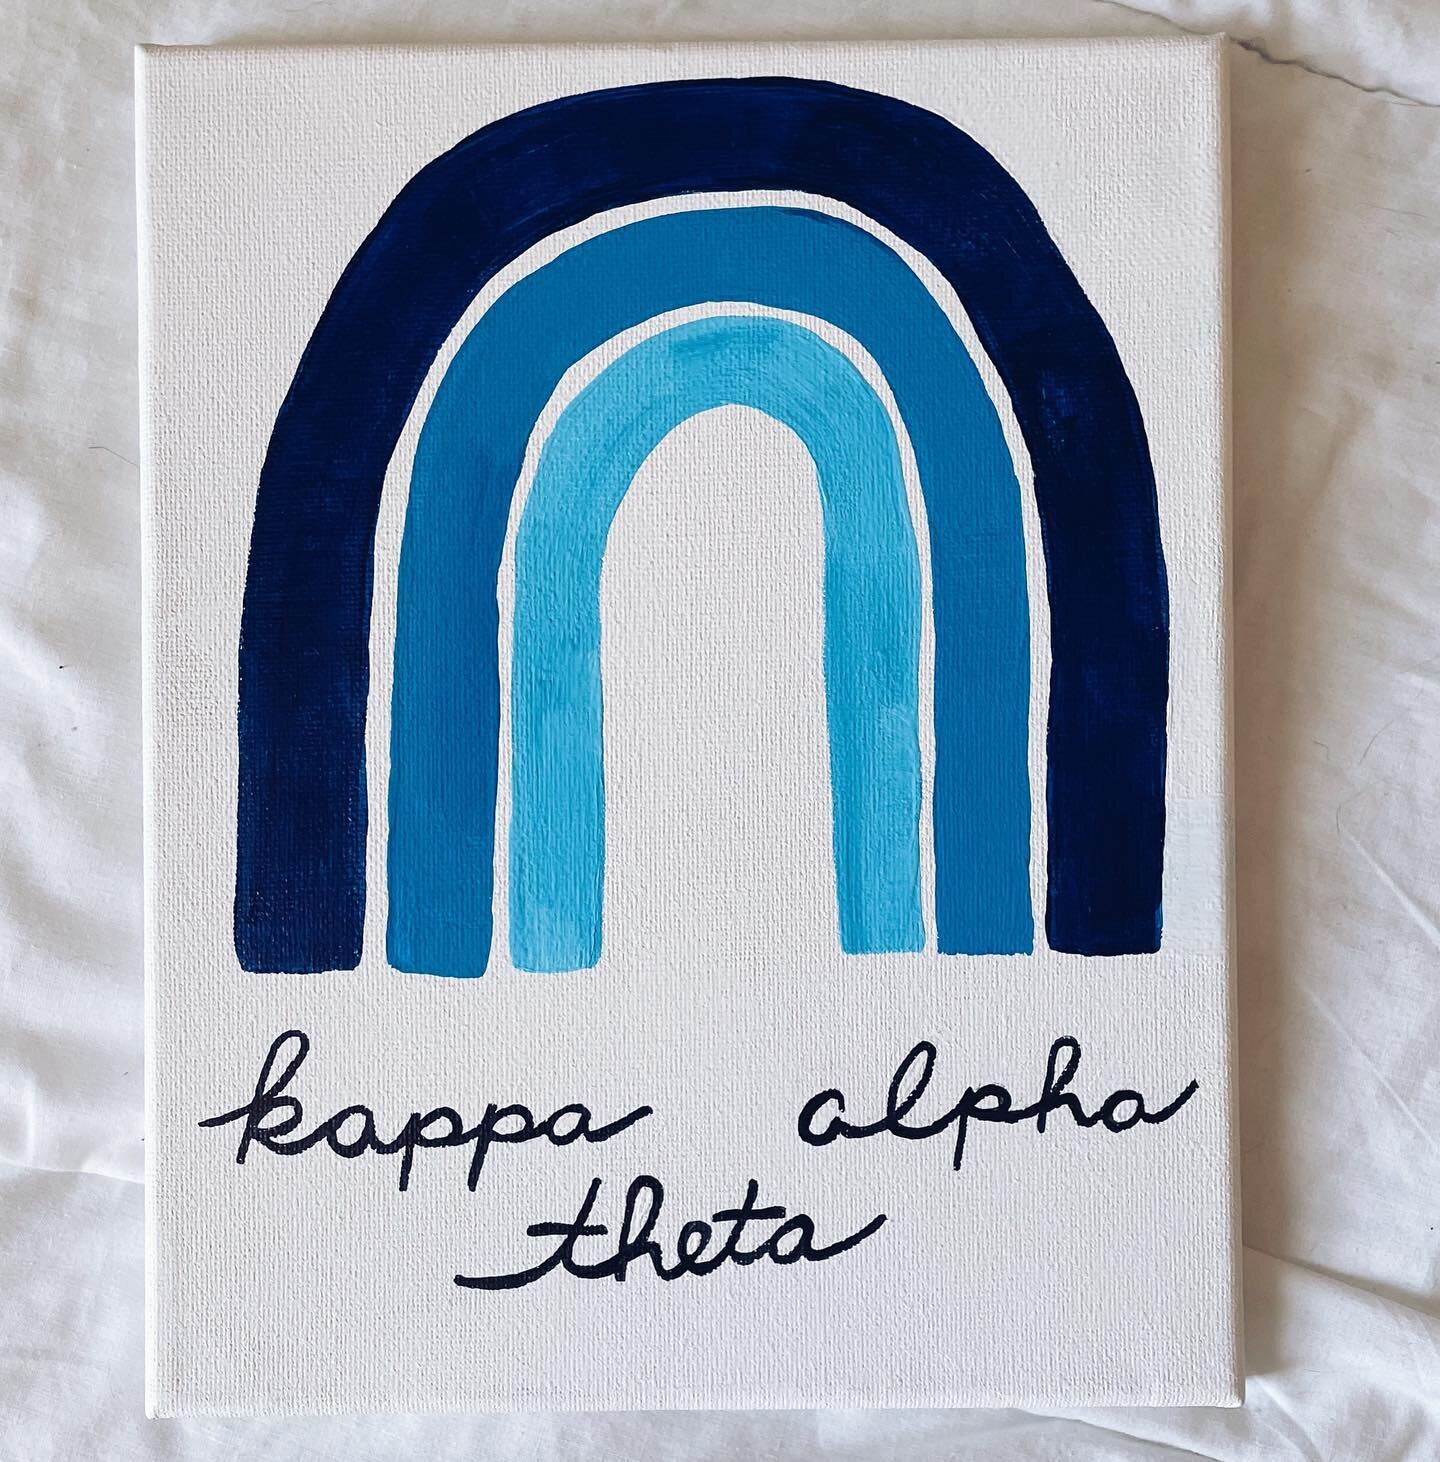 Custom painting by Ms. McKenzie 💙

Artsy Partsy is a great place to learn different mediums of art at all ages! We have classes for everyone. Check out our website: www.artsypartsy.net 

#artsypartsymd #canvaspainting #blue #kao #kappa #alpha #theta